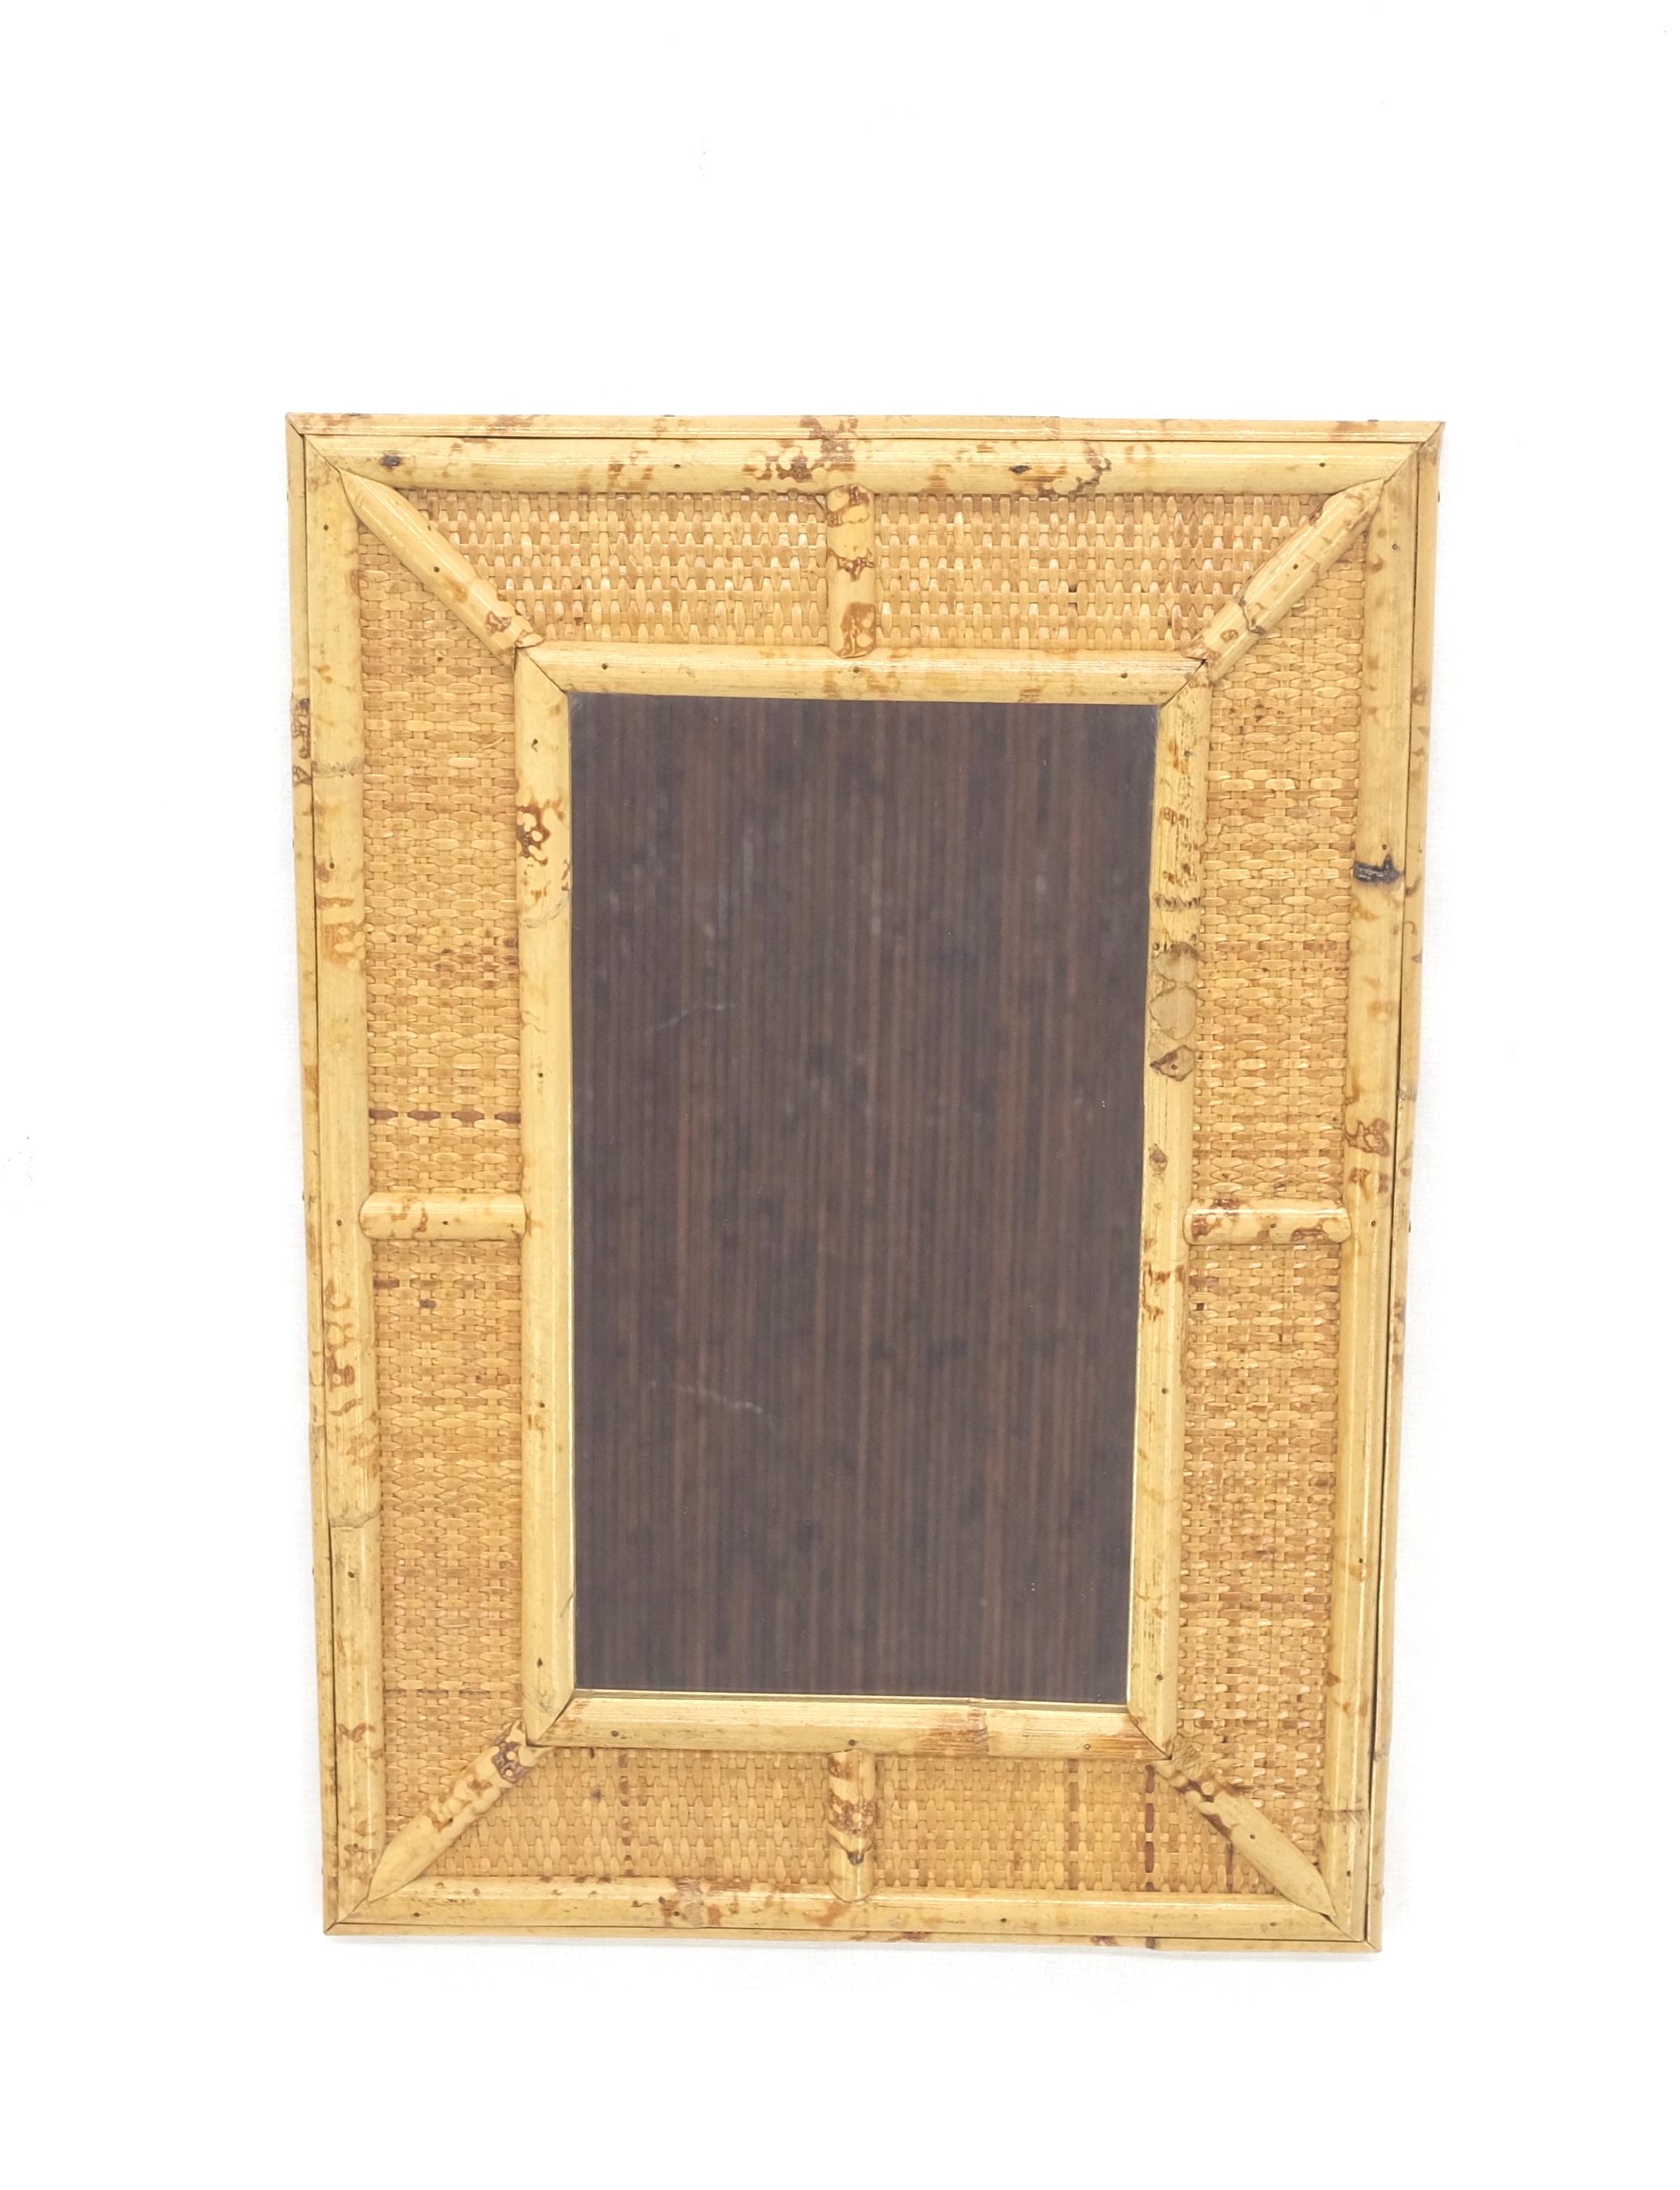 American Compact Rectangle Bamboo Frame Decorative Mid Century Modern c1970s Wall Mirror  For Sale